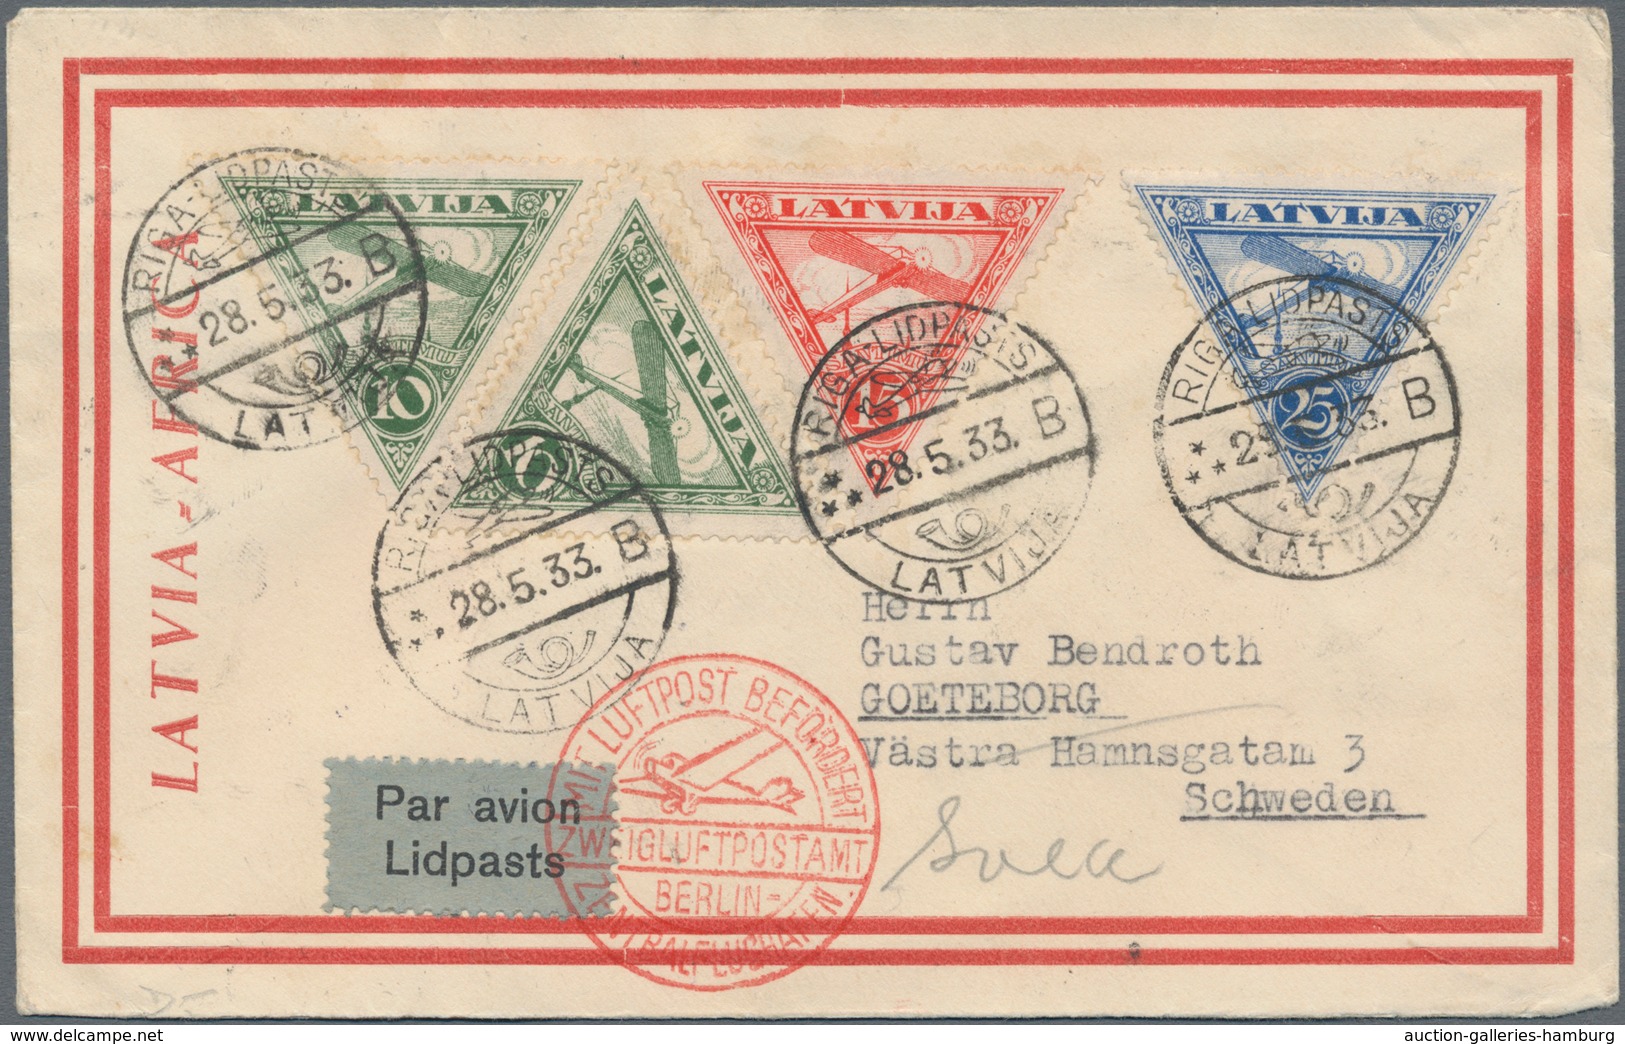 Lettland: 1933, Special Cover "LATVIA-AFRICA" Follower Cover From "RIGA-LIDPASTS 28.5.33" Via Berlin - Lettland